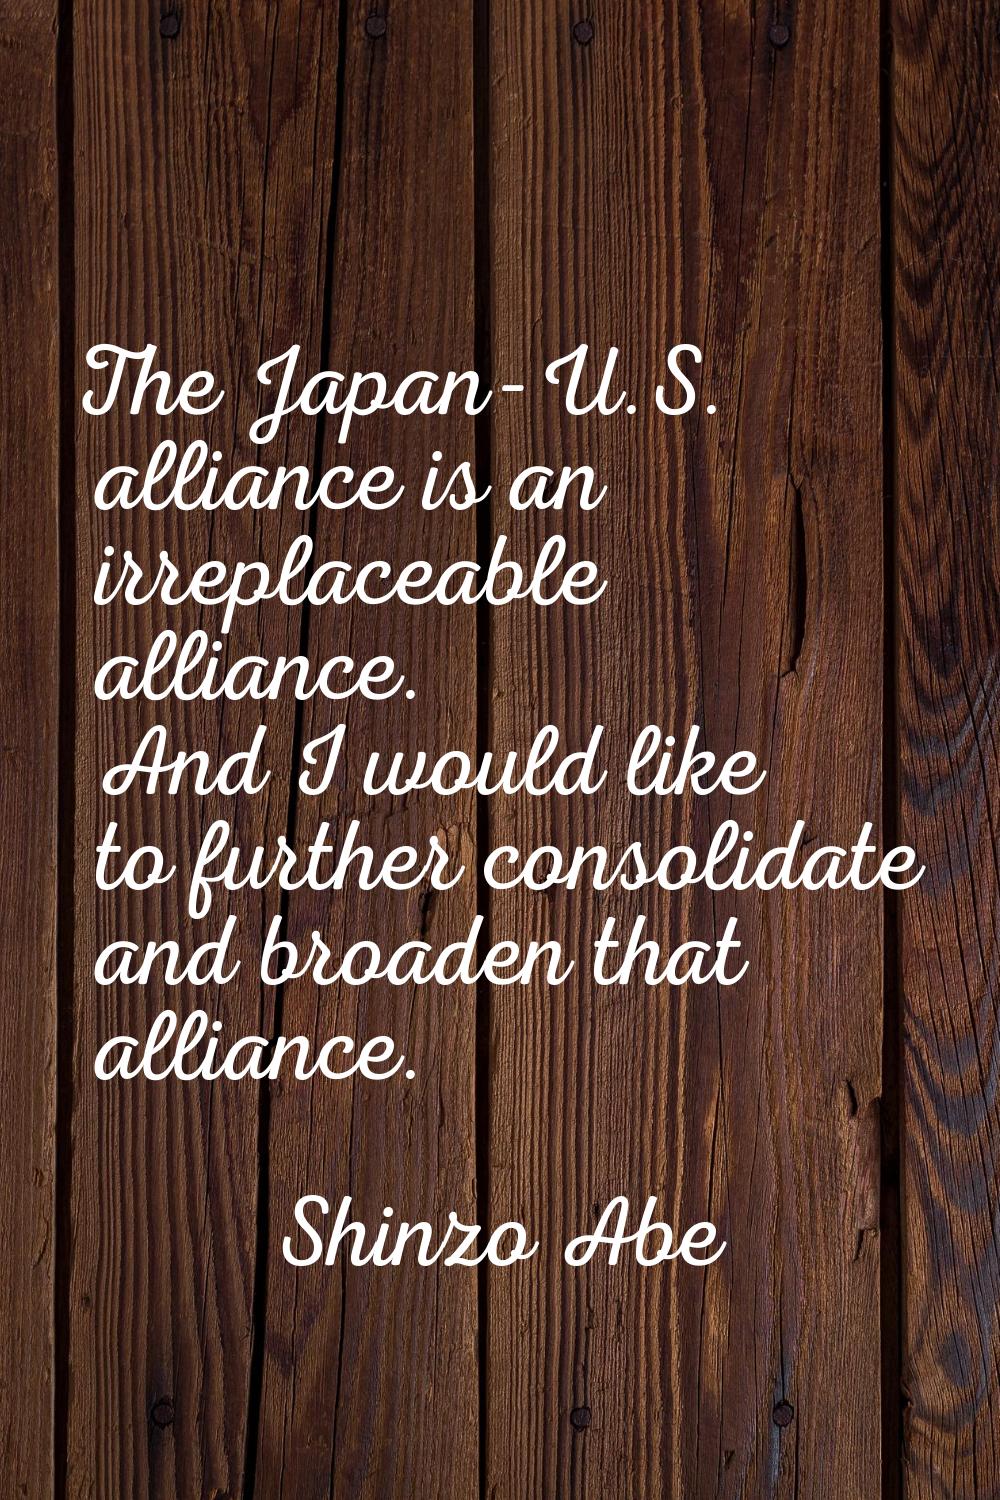 The Japan-U.S. alliance is an irreplaceable alliance. And I would like to further consolidate and b